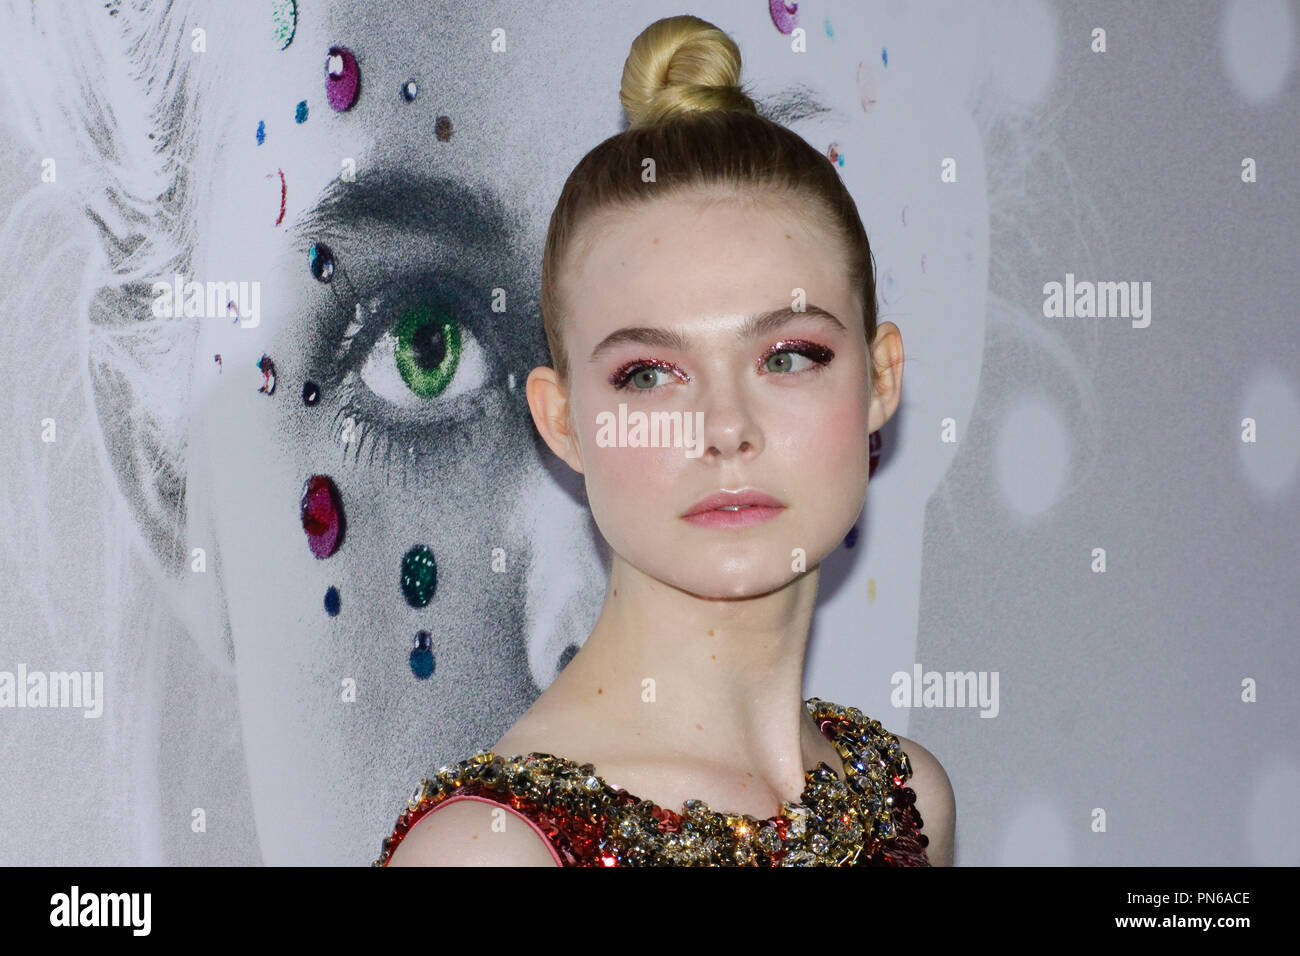 Elle Fanning at the Premiere of 'The Neon Demon' held at ArcLight Cinemas Cinerama Dome in Hollywood, CA, June 14, 2016. Photo by Joe Martinez / PictureLux Stock Photo